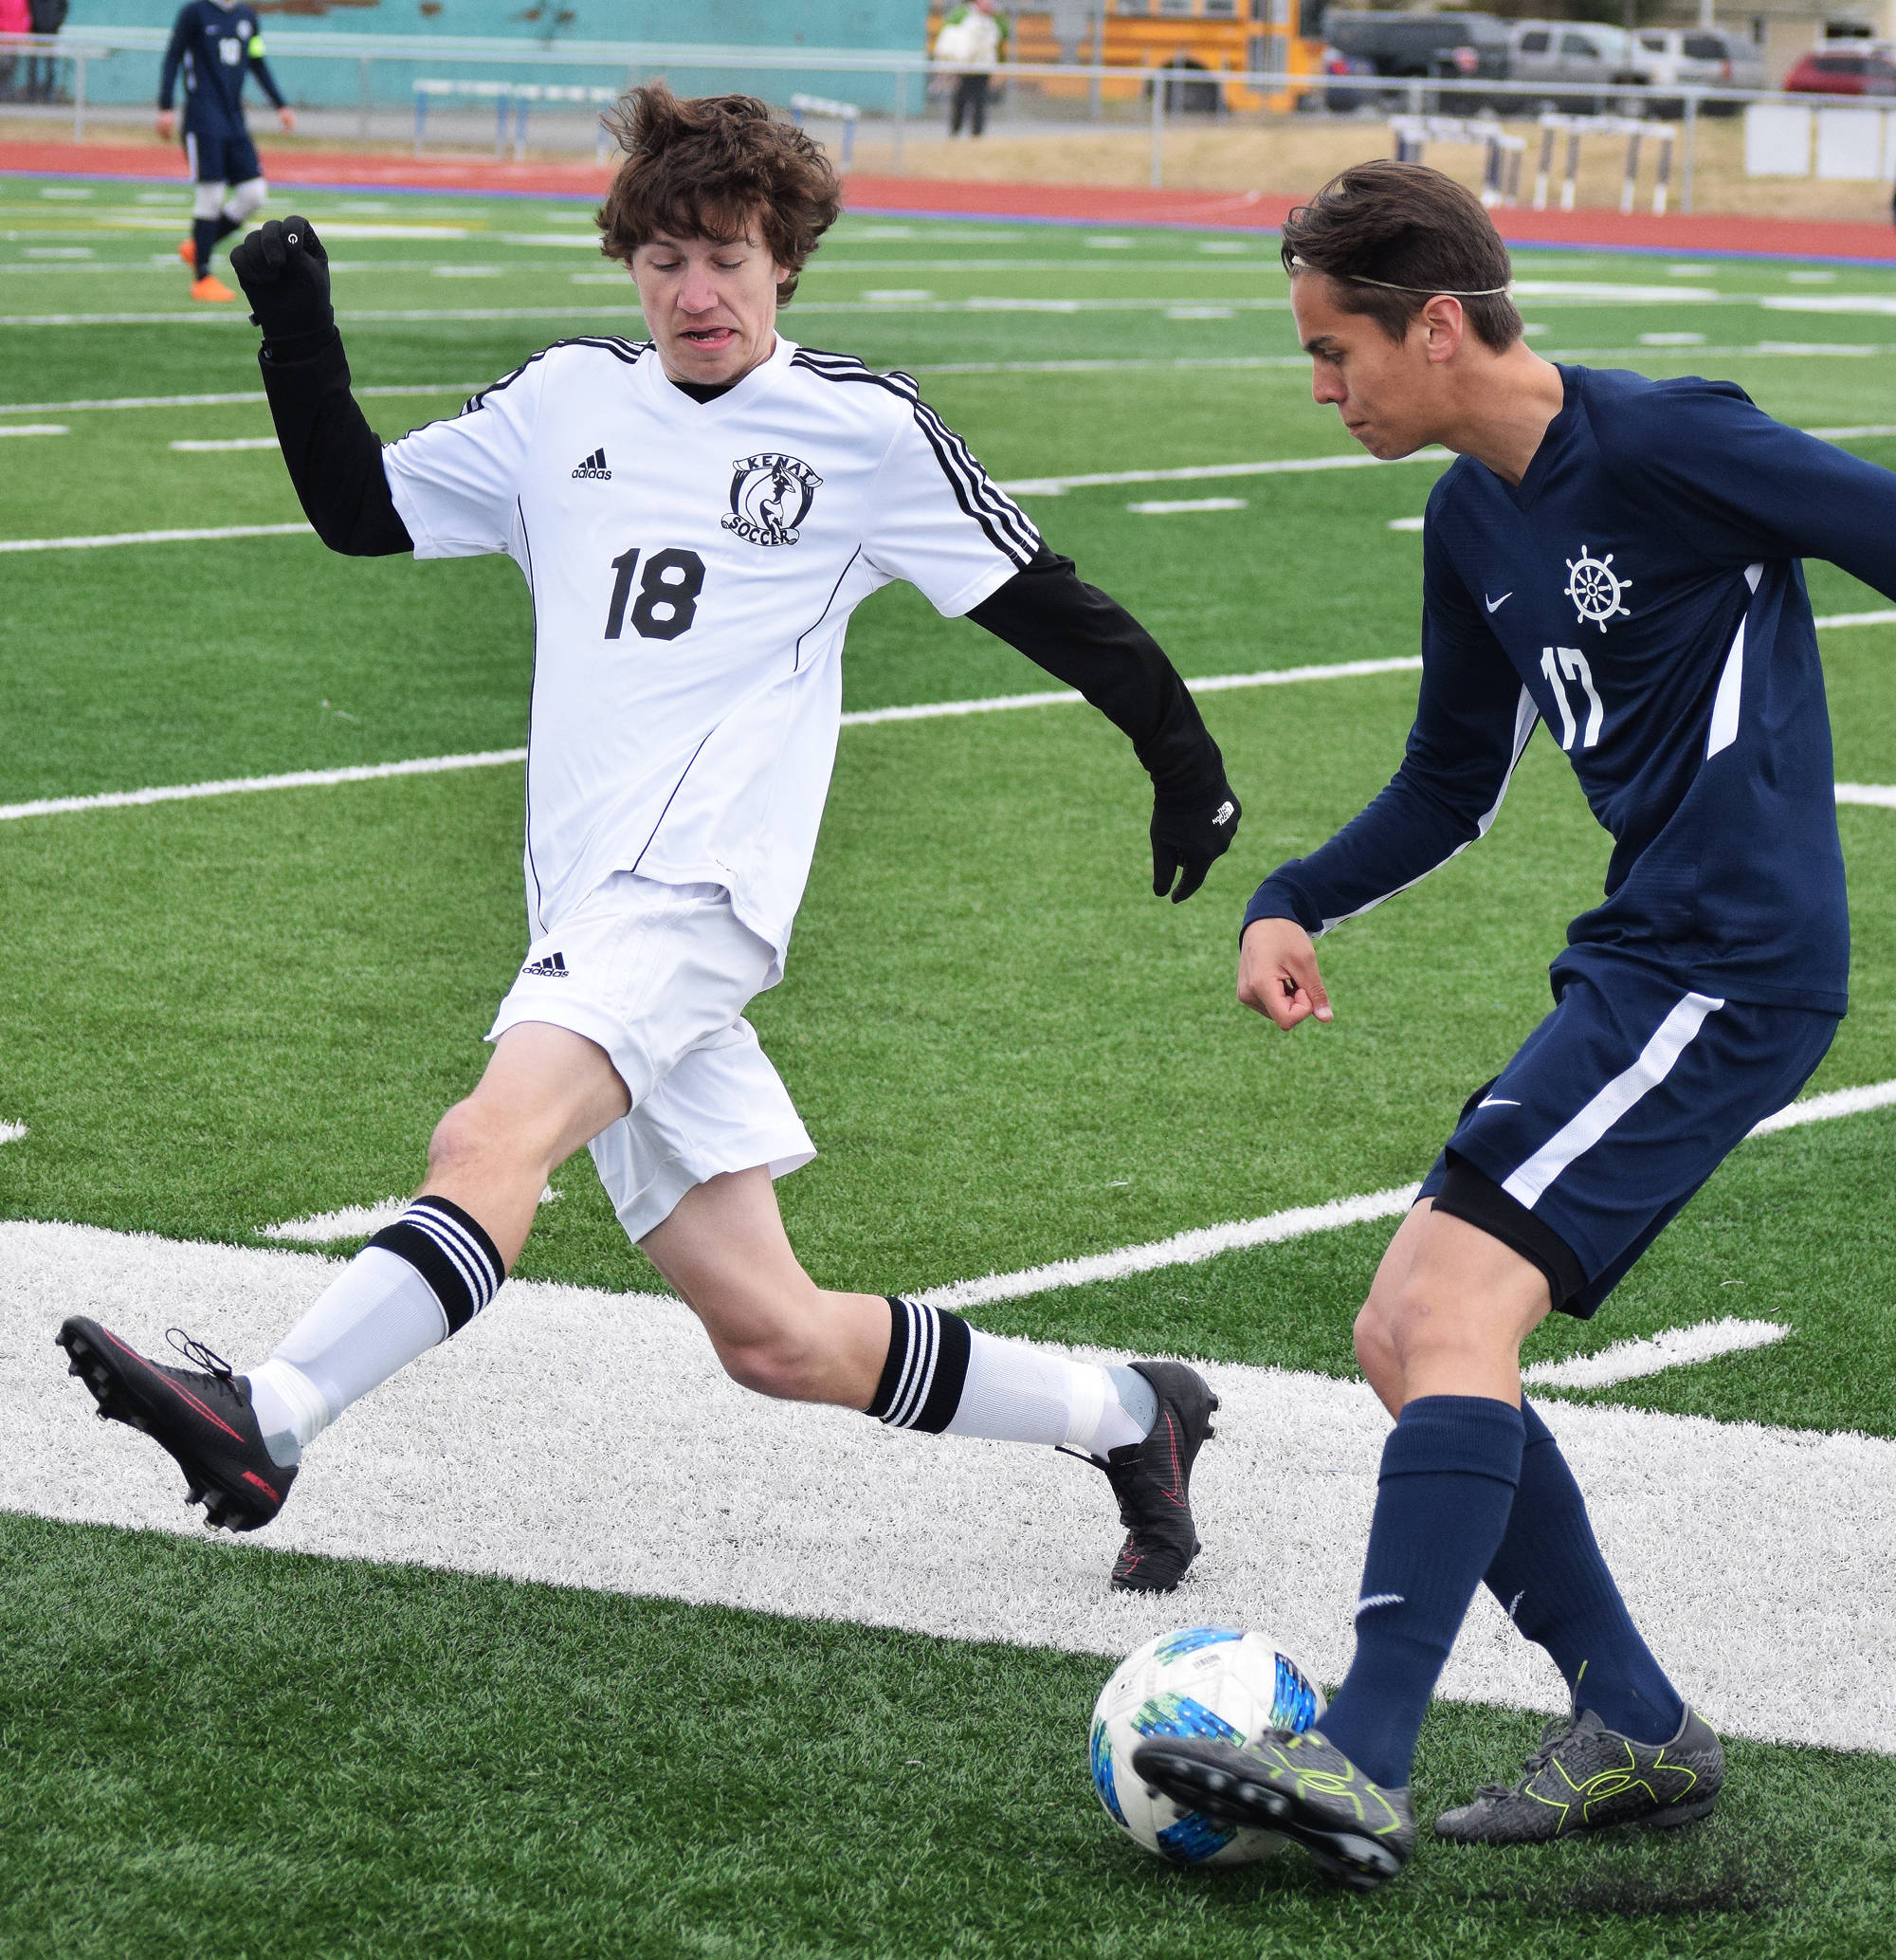 Kenai’s Damien Redder attempts to win the ball from Homer’s Isaiah Nevak Saturday in the Peninsula Conference boys soccer championship at Soldotna High School. (Photo by Joey Klecka/Peninsula Clarion)